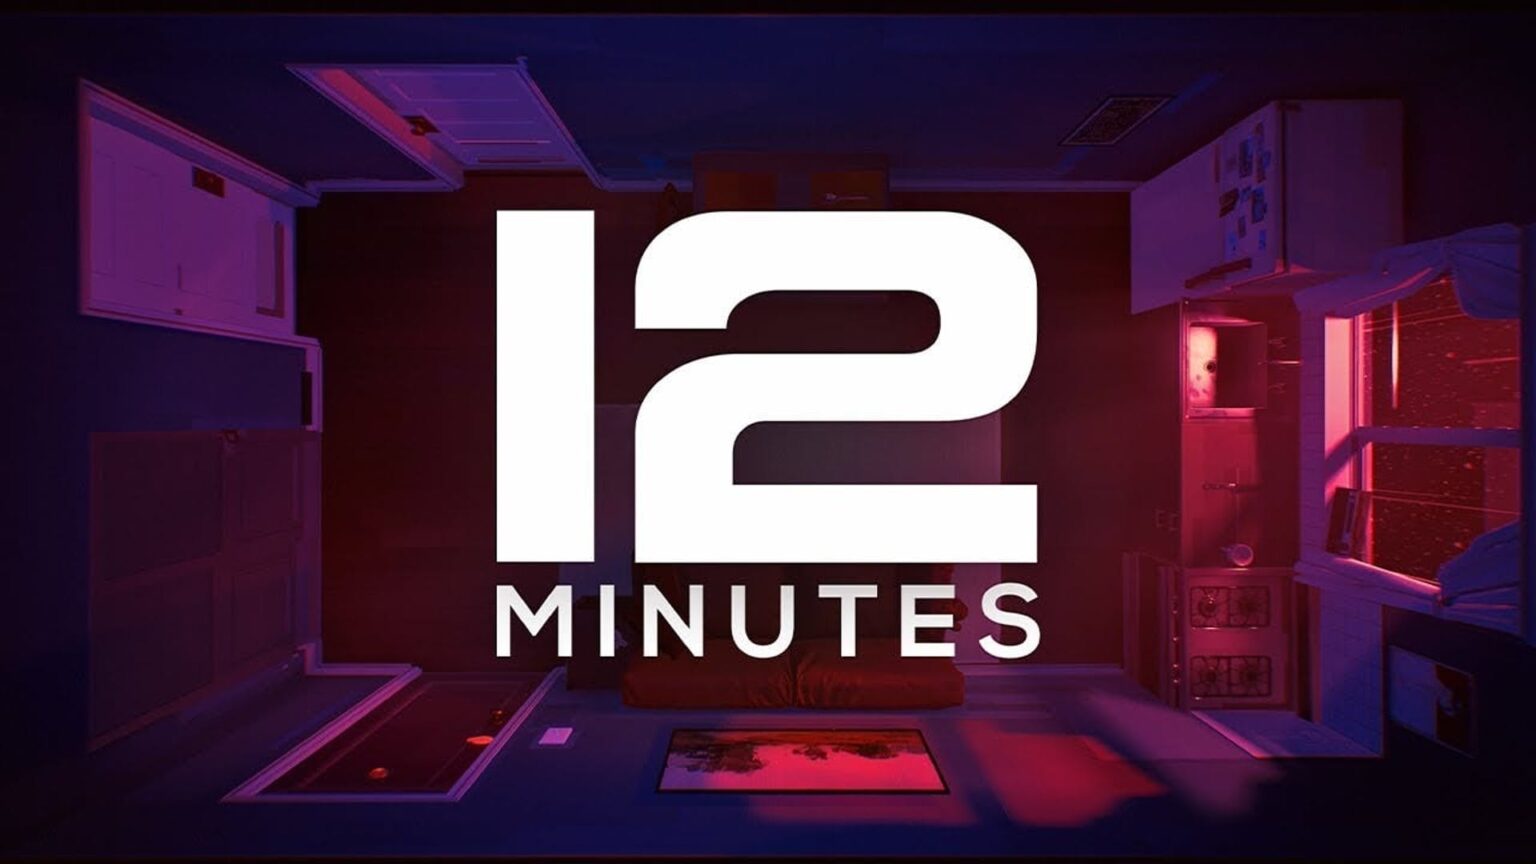 3 Reasons to be Excited for 12 Minutes